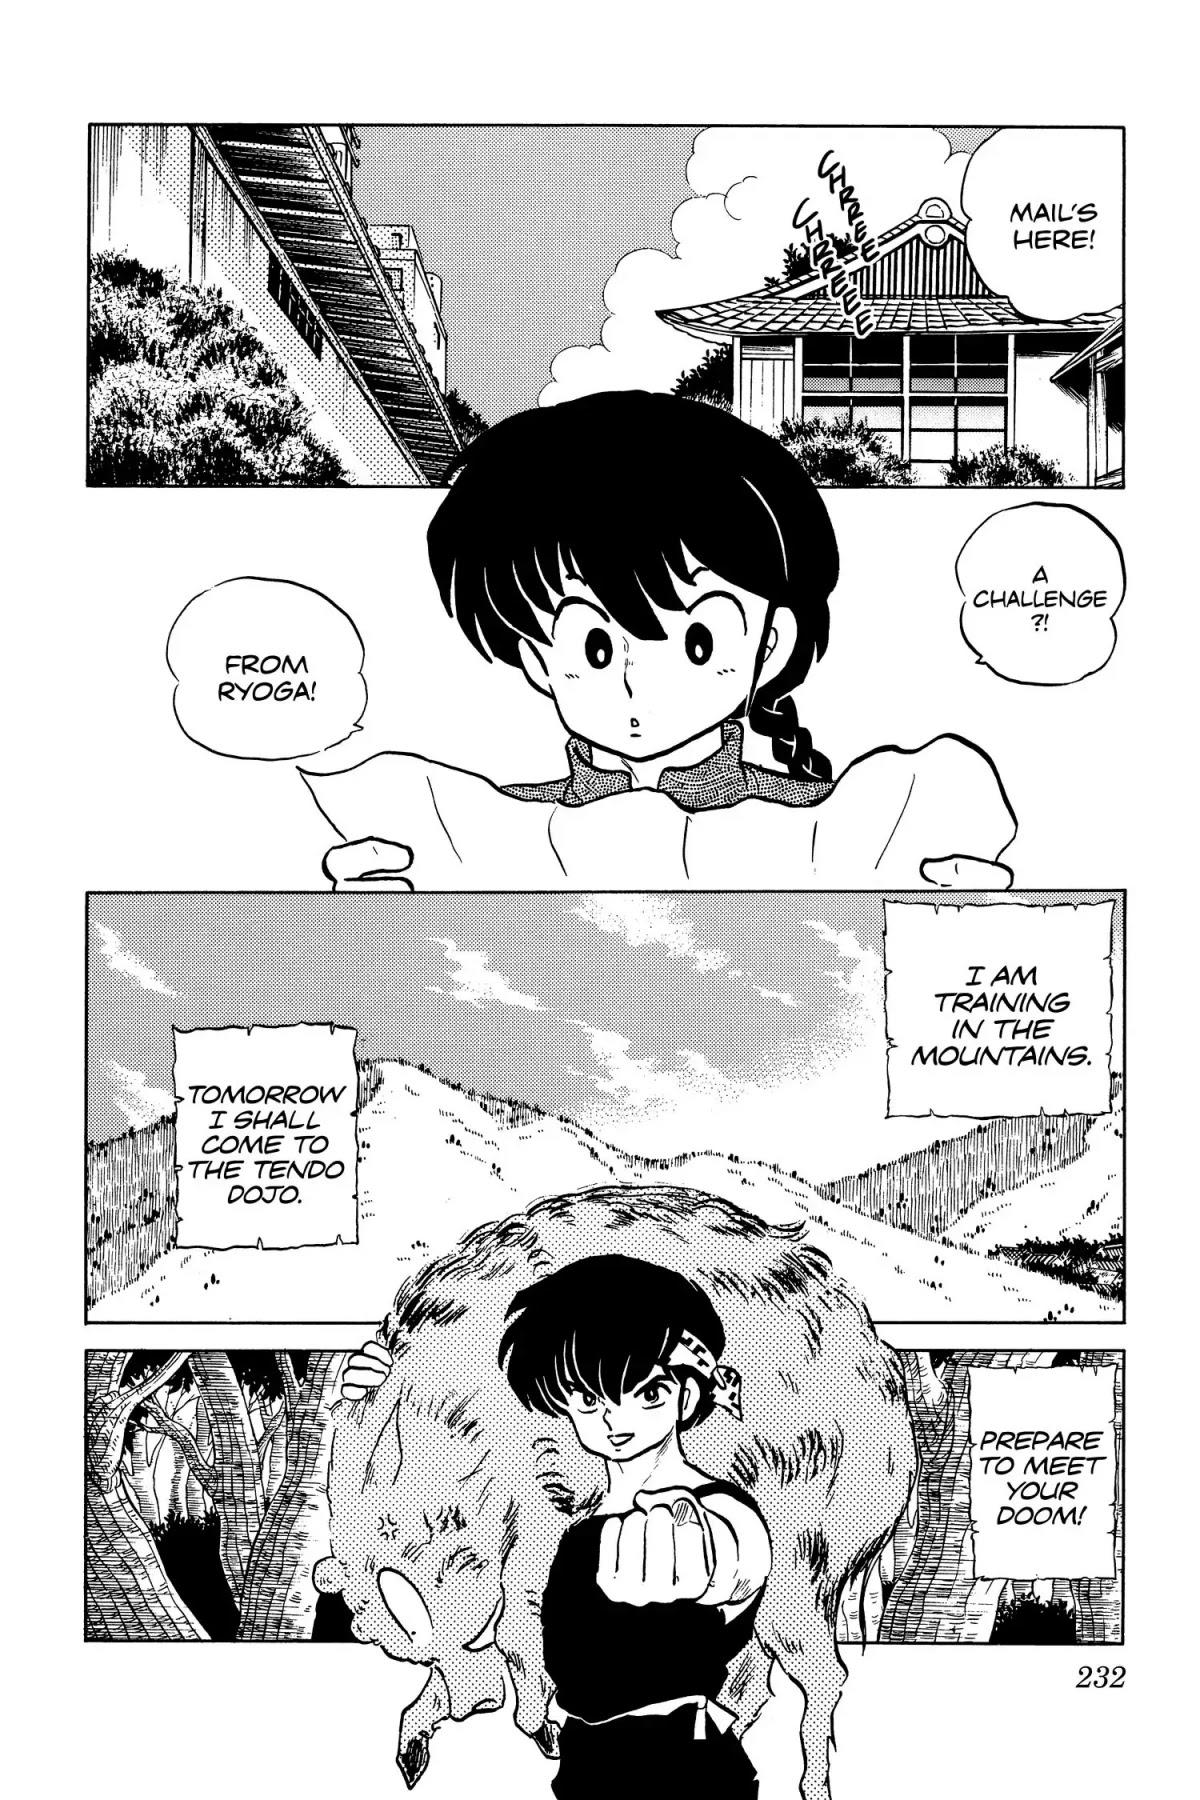 Ranma 1/2 Chapter 51: Care To Join Me?  